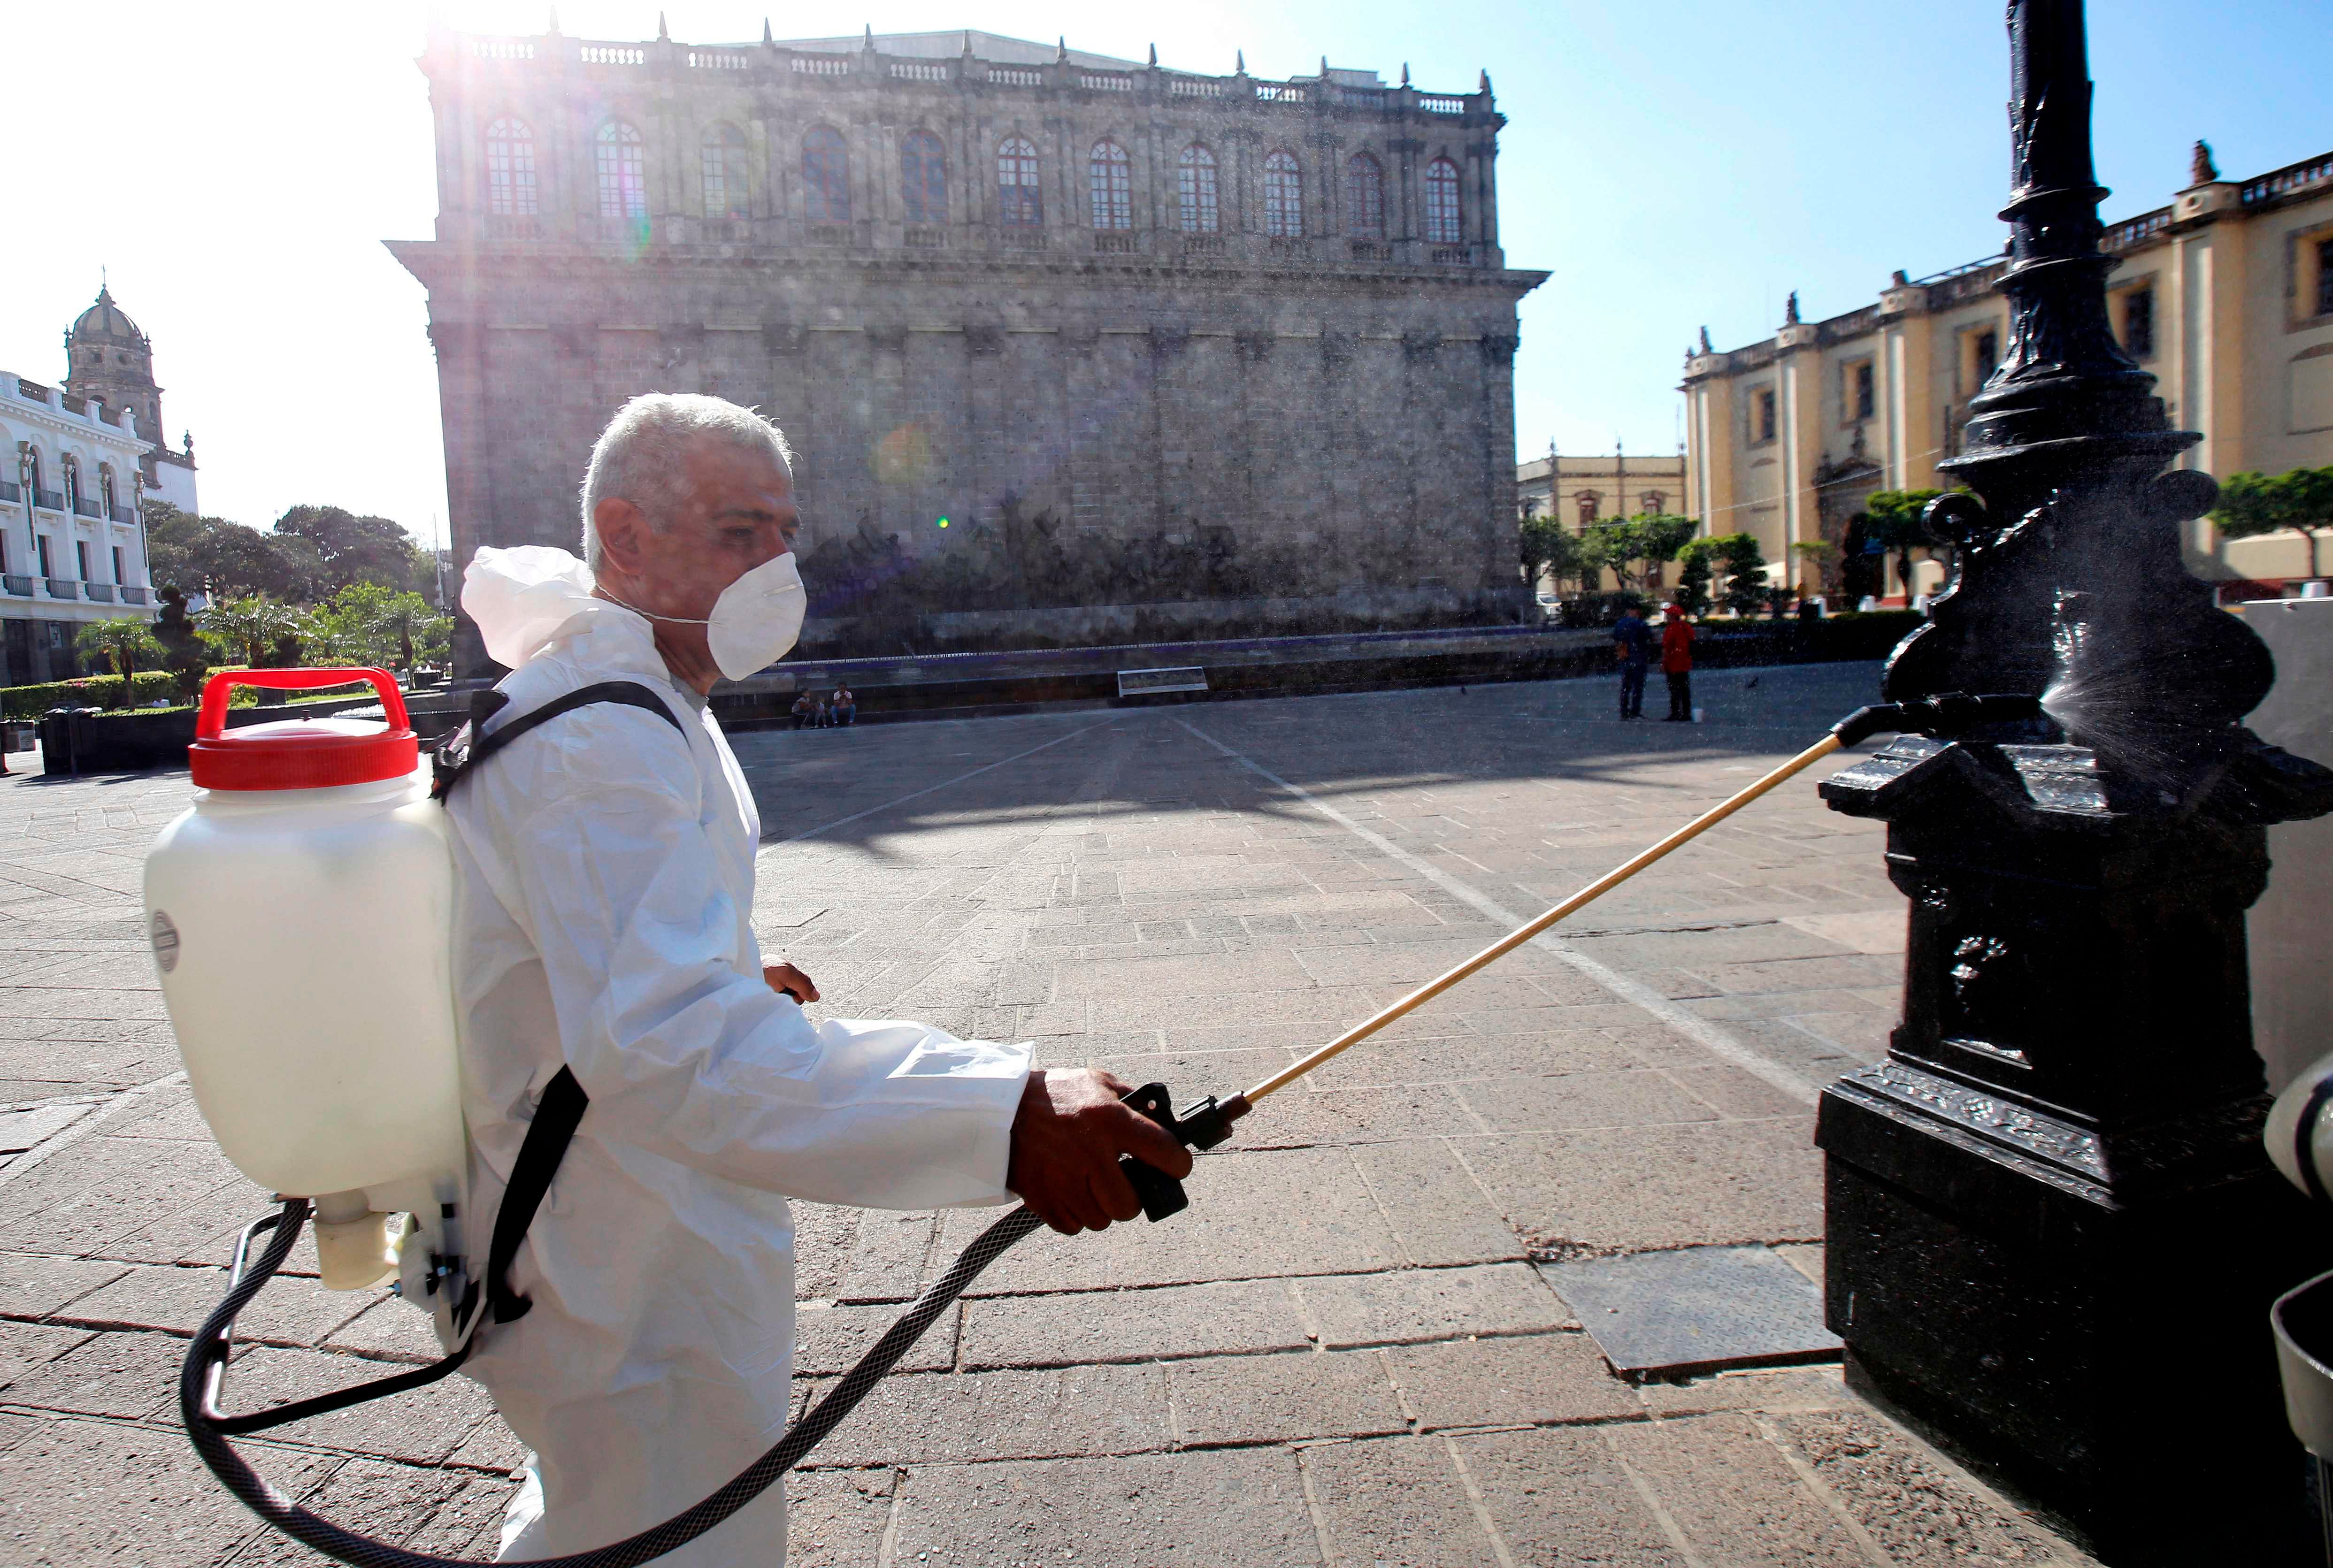 A worker wearing a protective suit sprays disinfectant during a campaign to sanitize public spaces as a preventive measure against the spread of the new coronavirus, COVID-19, in Guadalajara, Mexico. (Credit: AFP)